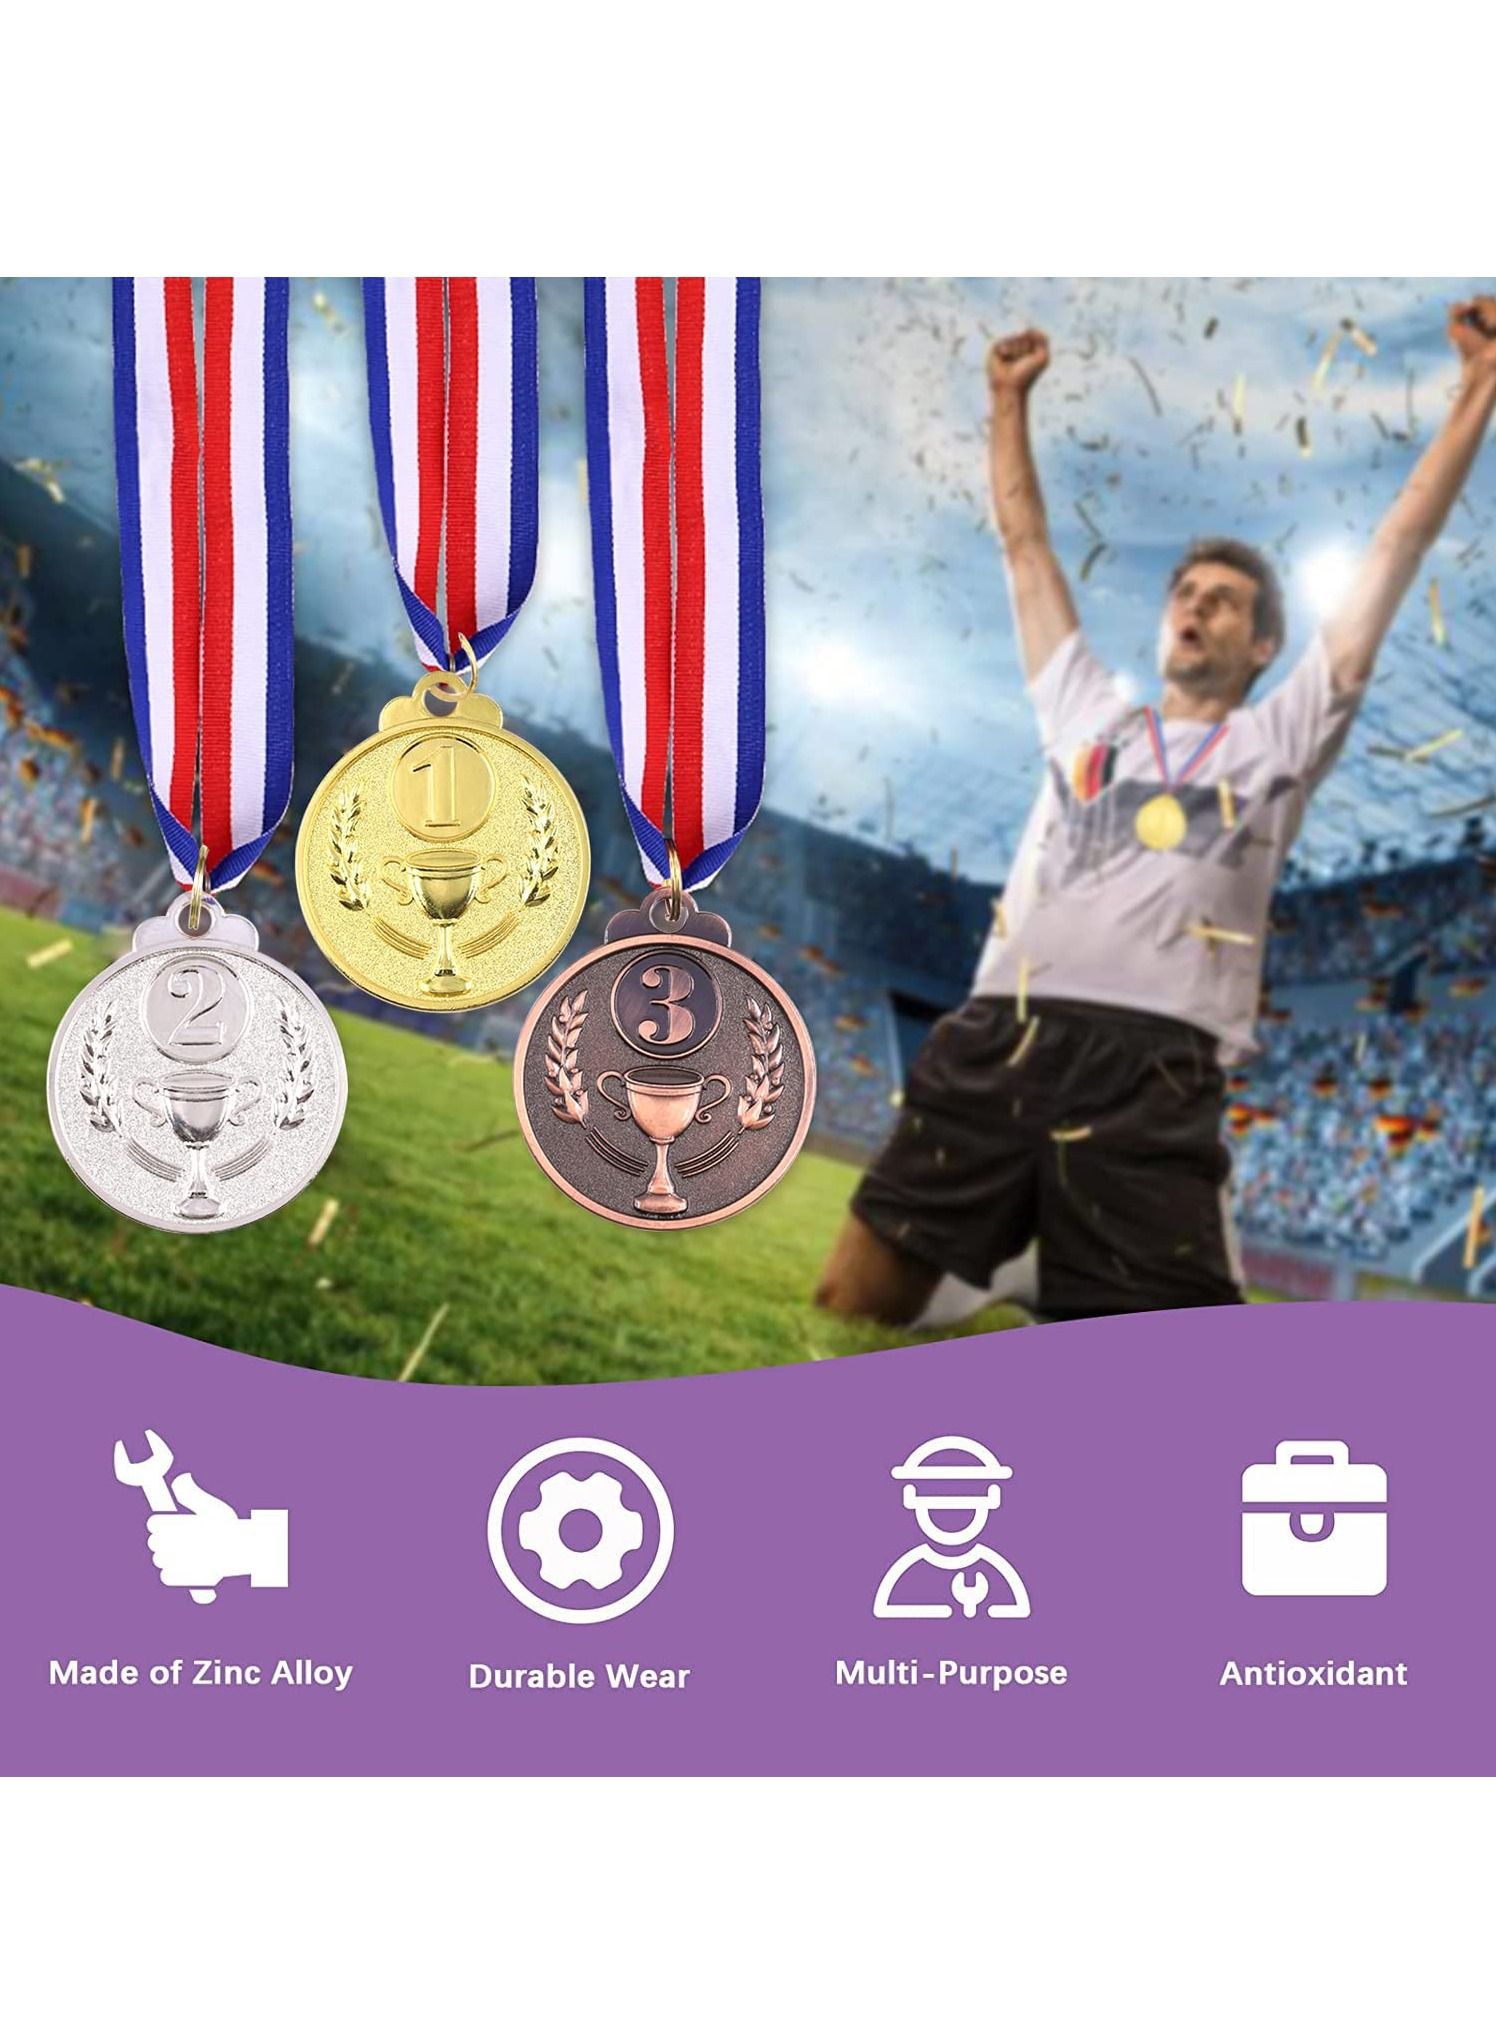 Award Metal Kids Winner Medals for Kids, Gold Silver and Bronze Medals with Trophy Pattern 1st 2nd 3rd Prizes for Sports Award, Competitions, Party Favors and Decorations(12 Pcs) 